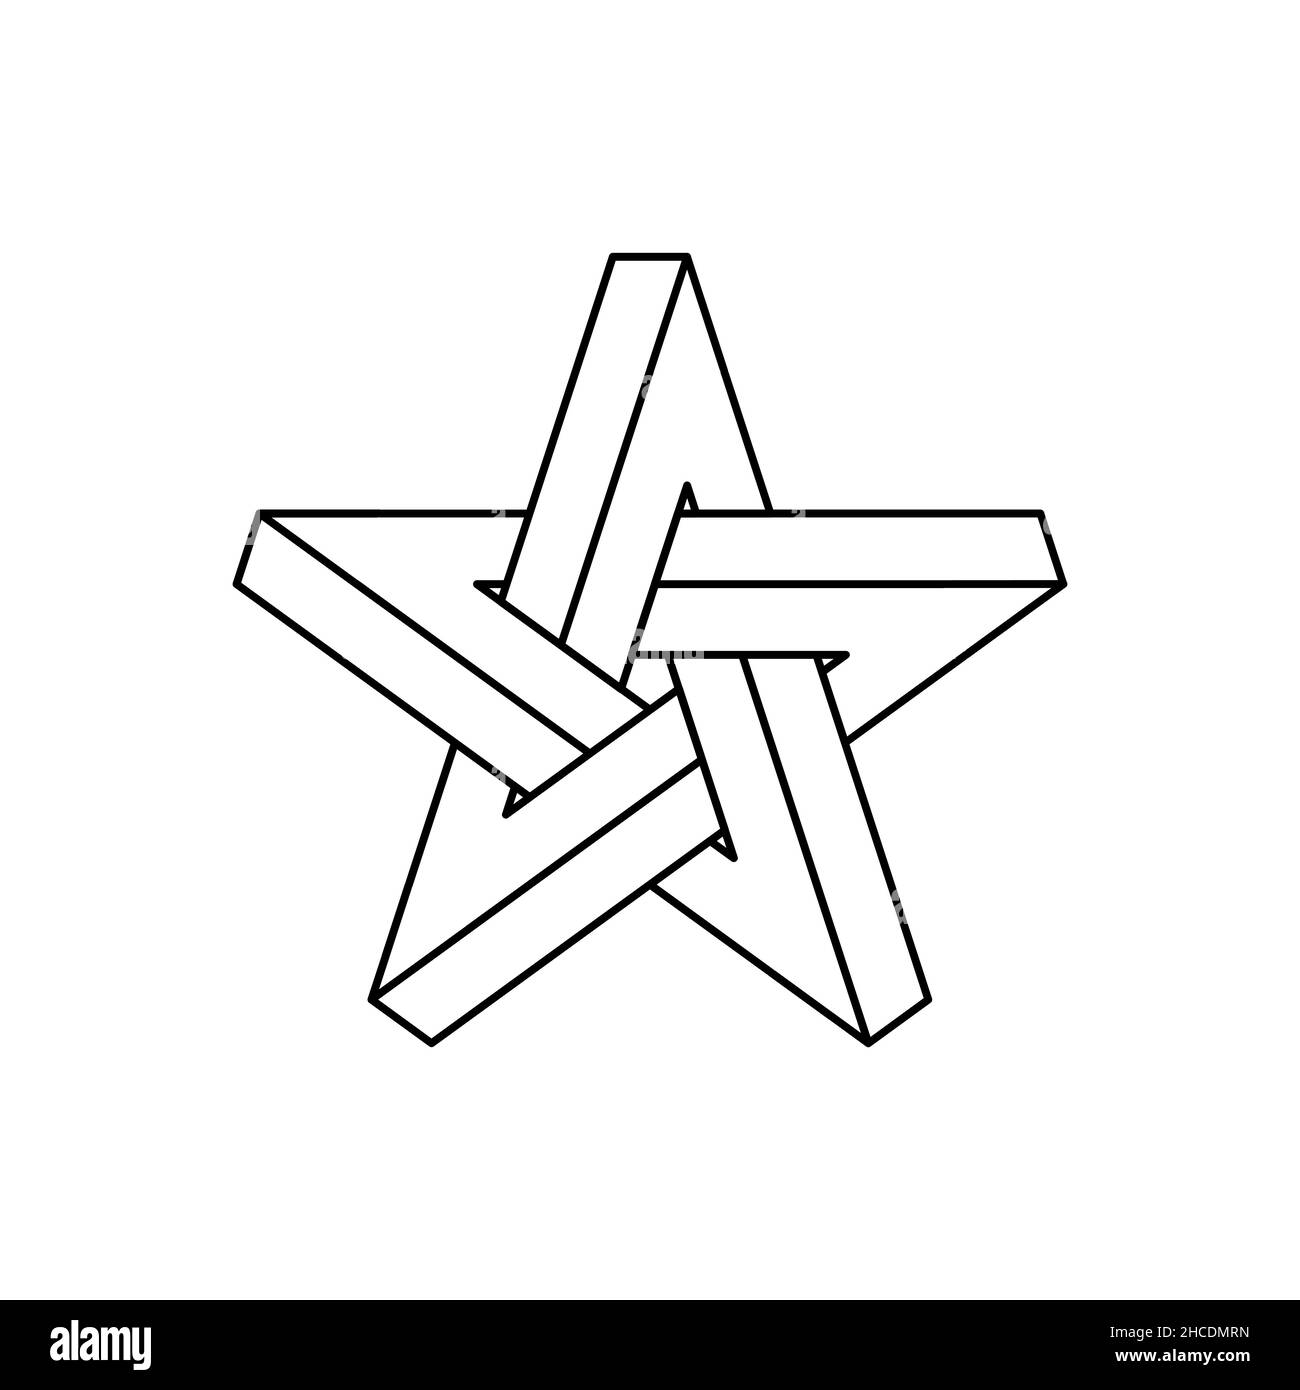 Impossible star outline. Optical illusion geometric shape. Impossible shape pentagram on white background. Five pointed star sign. Abstract symbol. Stock Vector